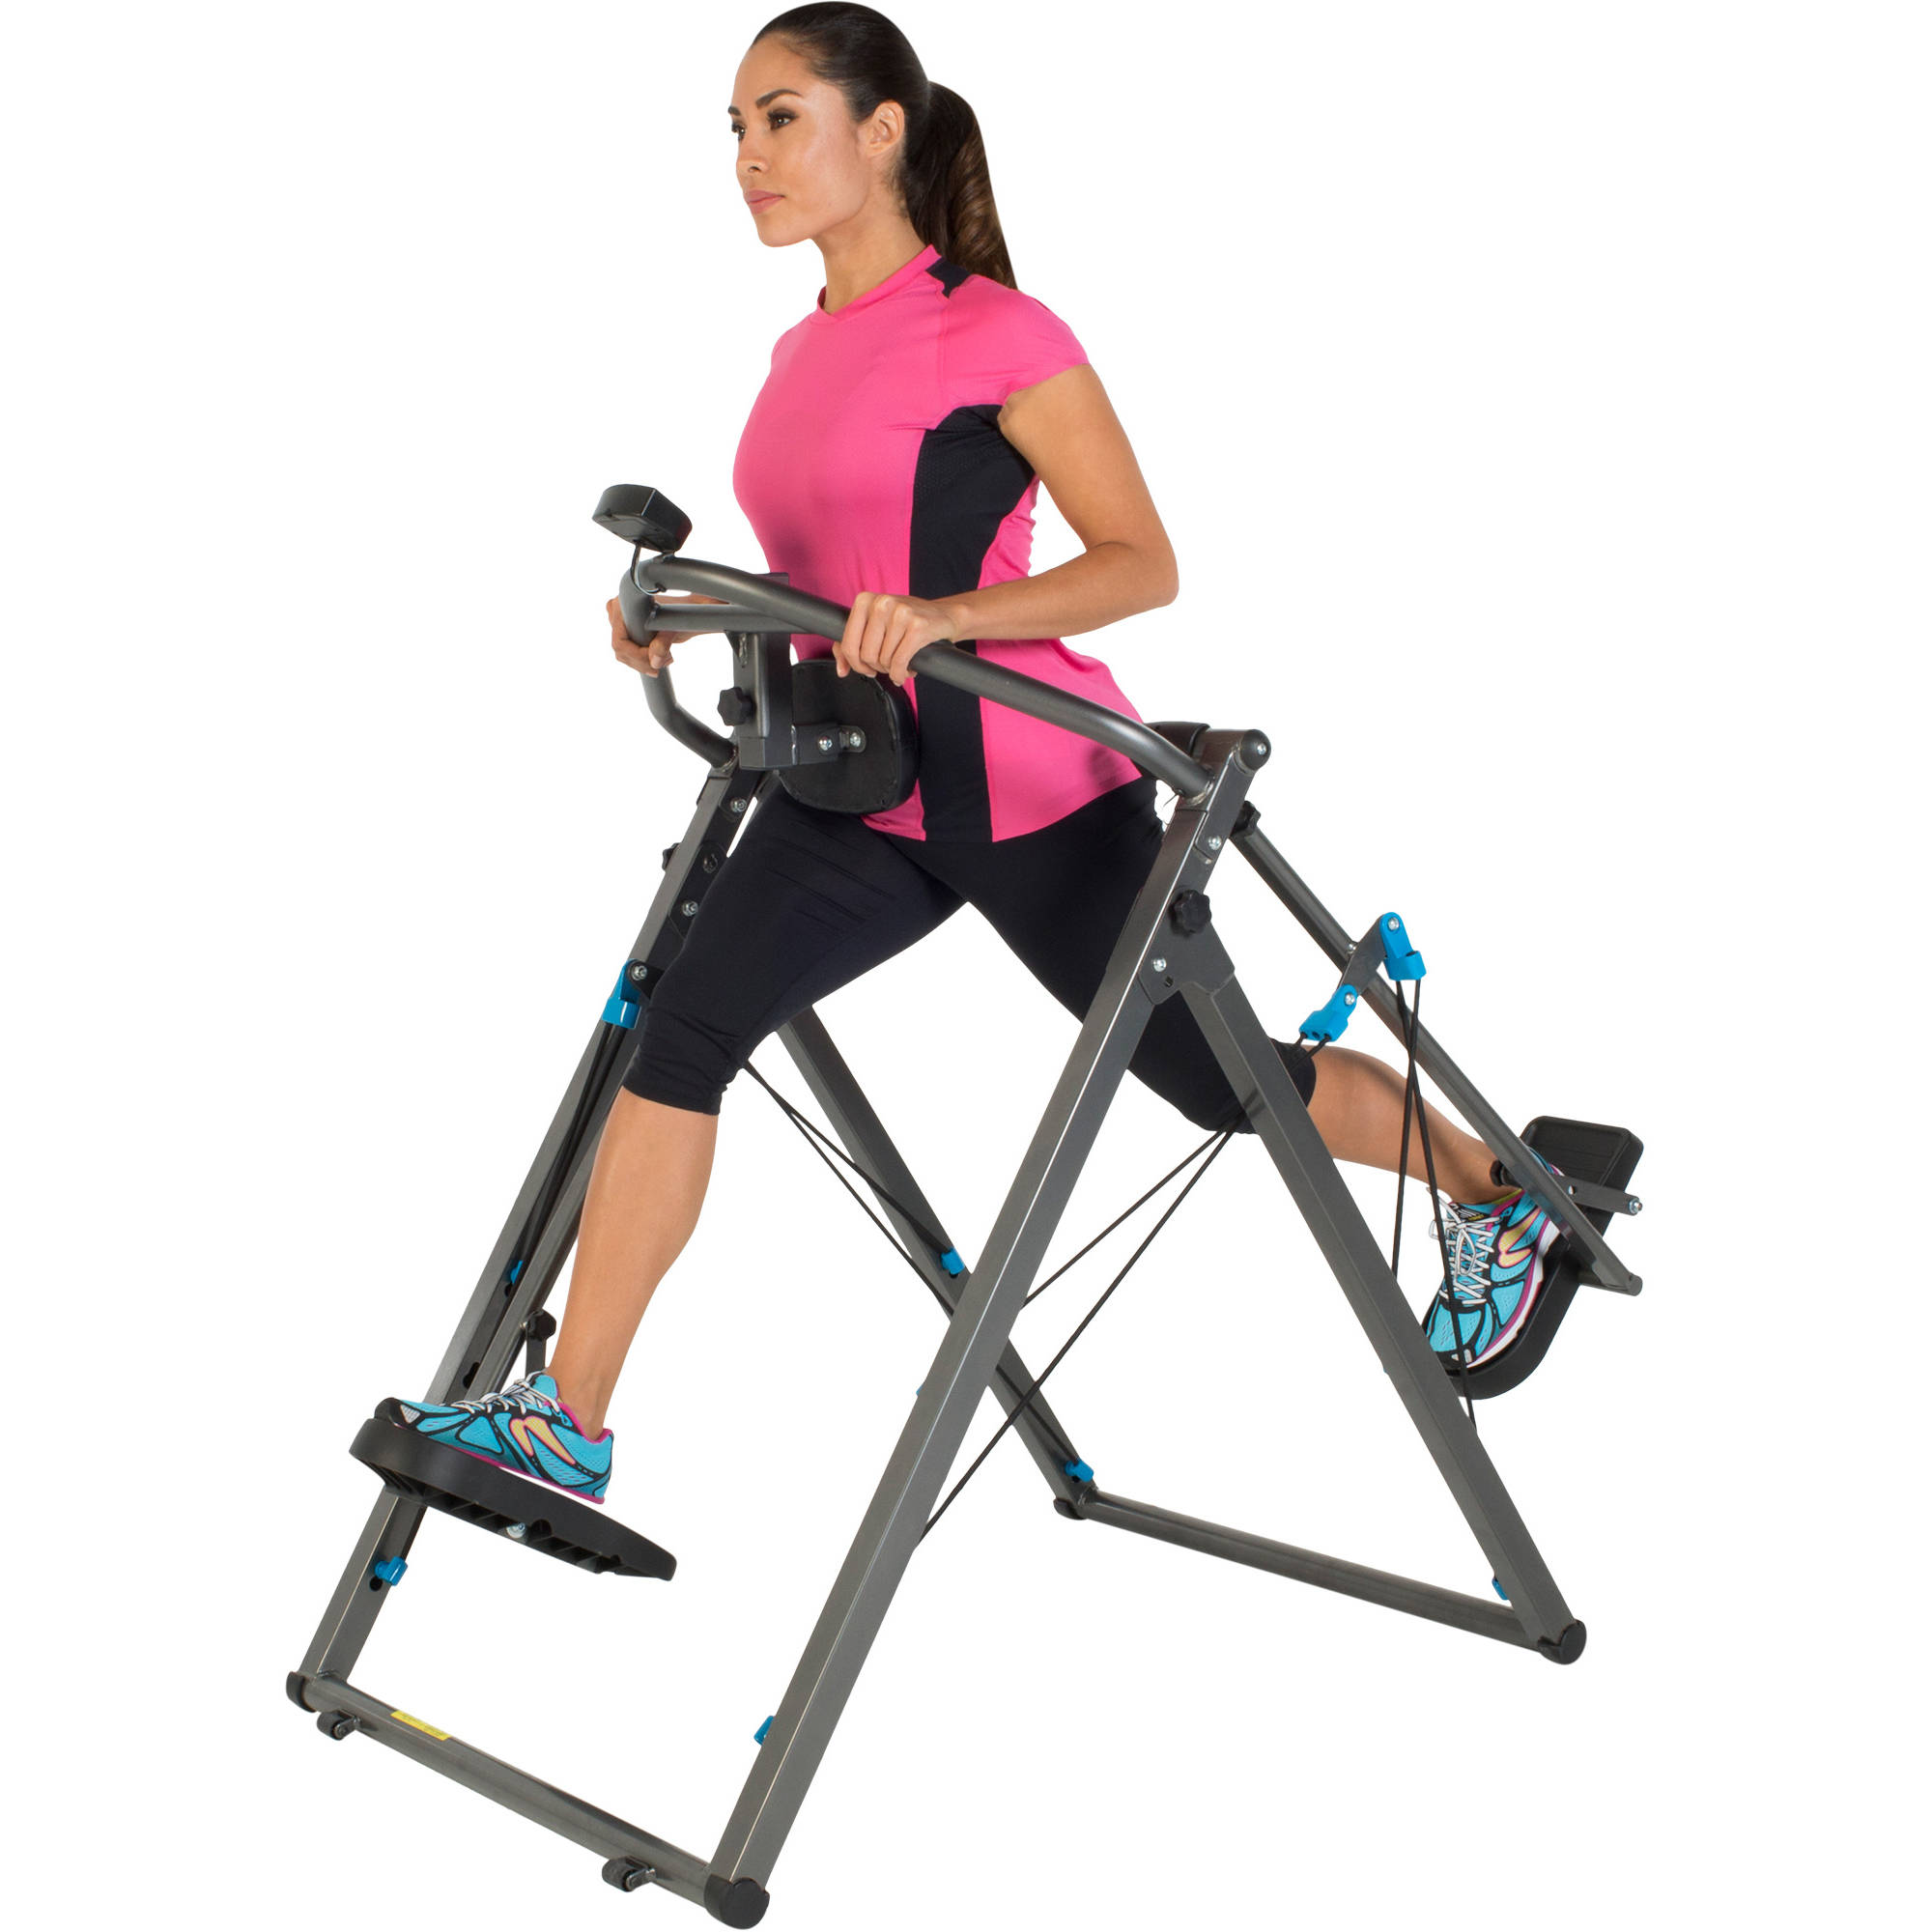 Fitness Reality Zero Impact 48" Stride Elliptical Cloud Walker X3 with Pulse Sensors - image 1 of 24